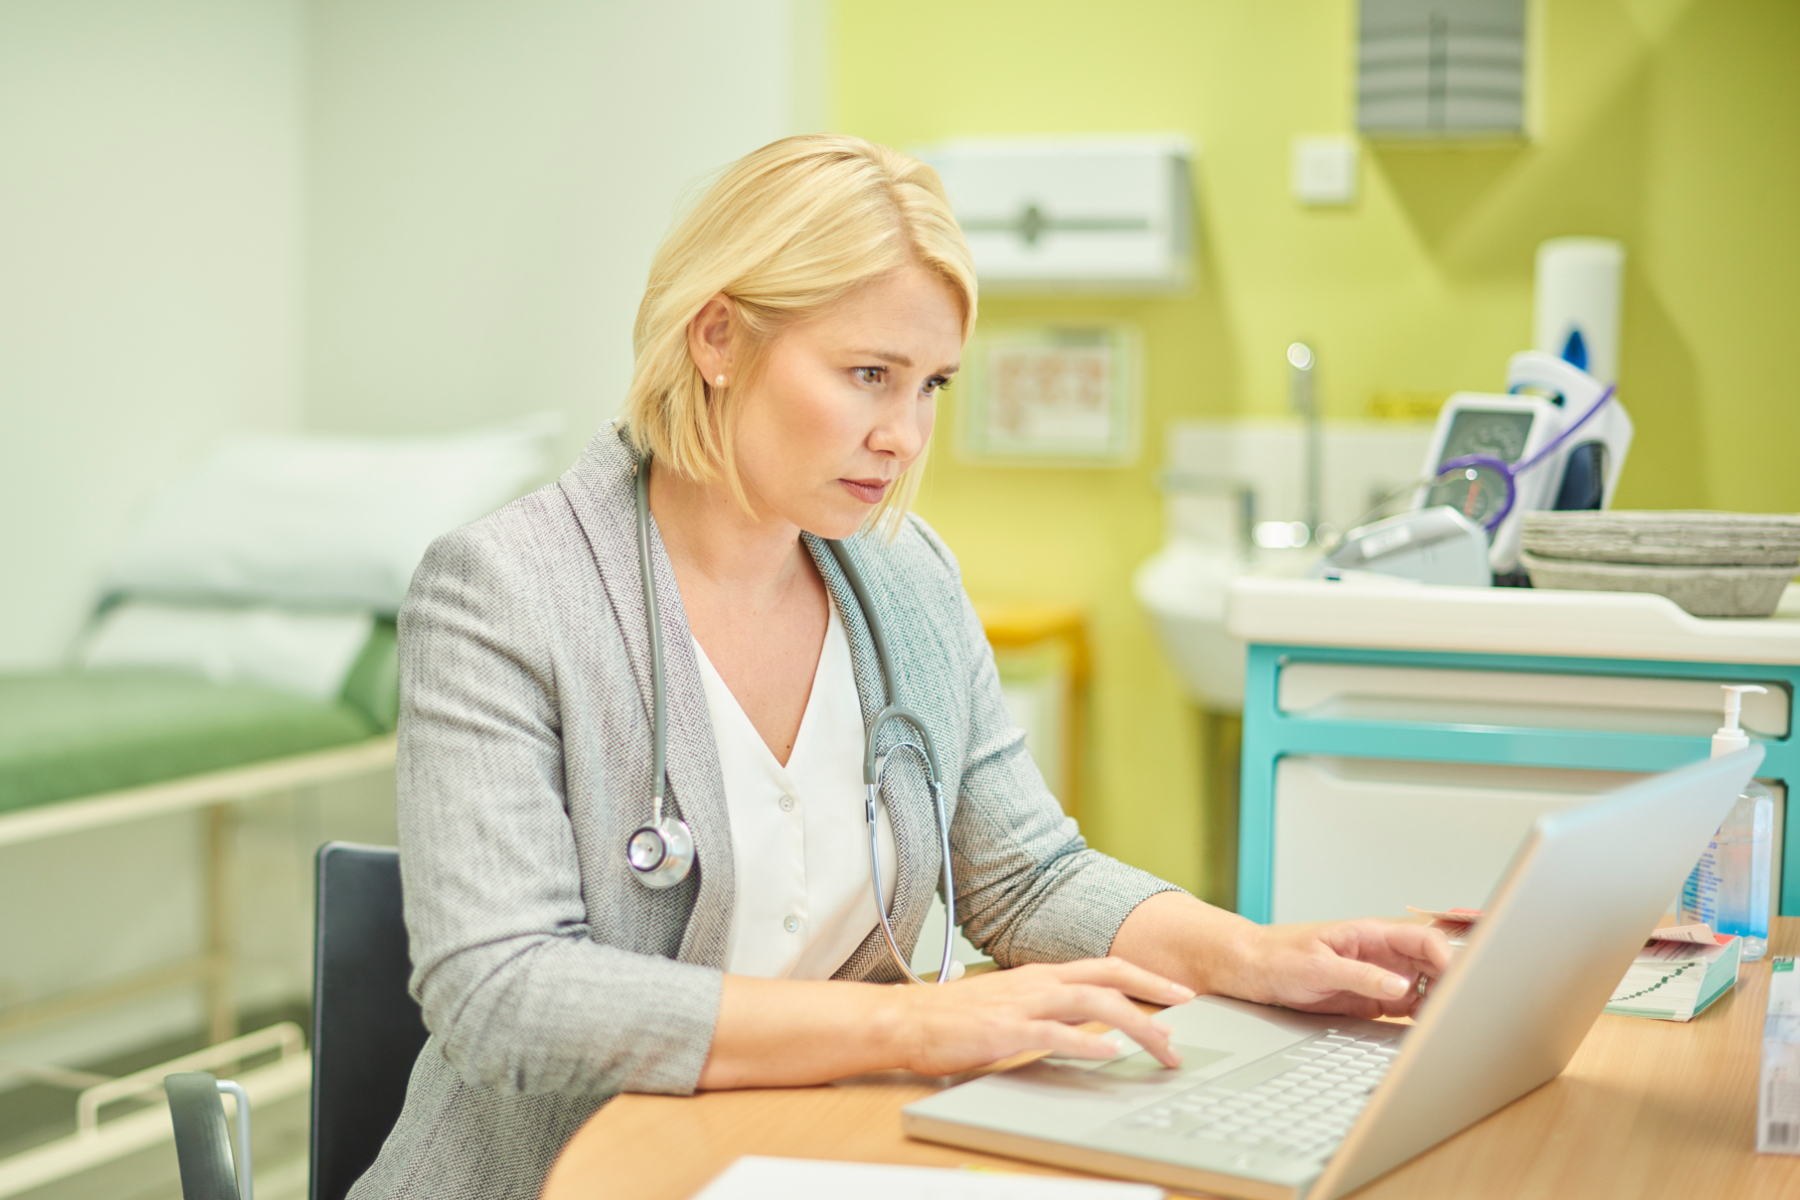 Image of a doctor using her laptop in an exam room